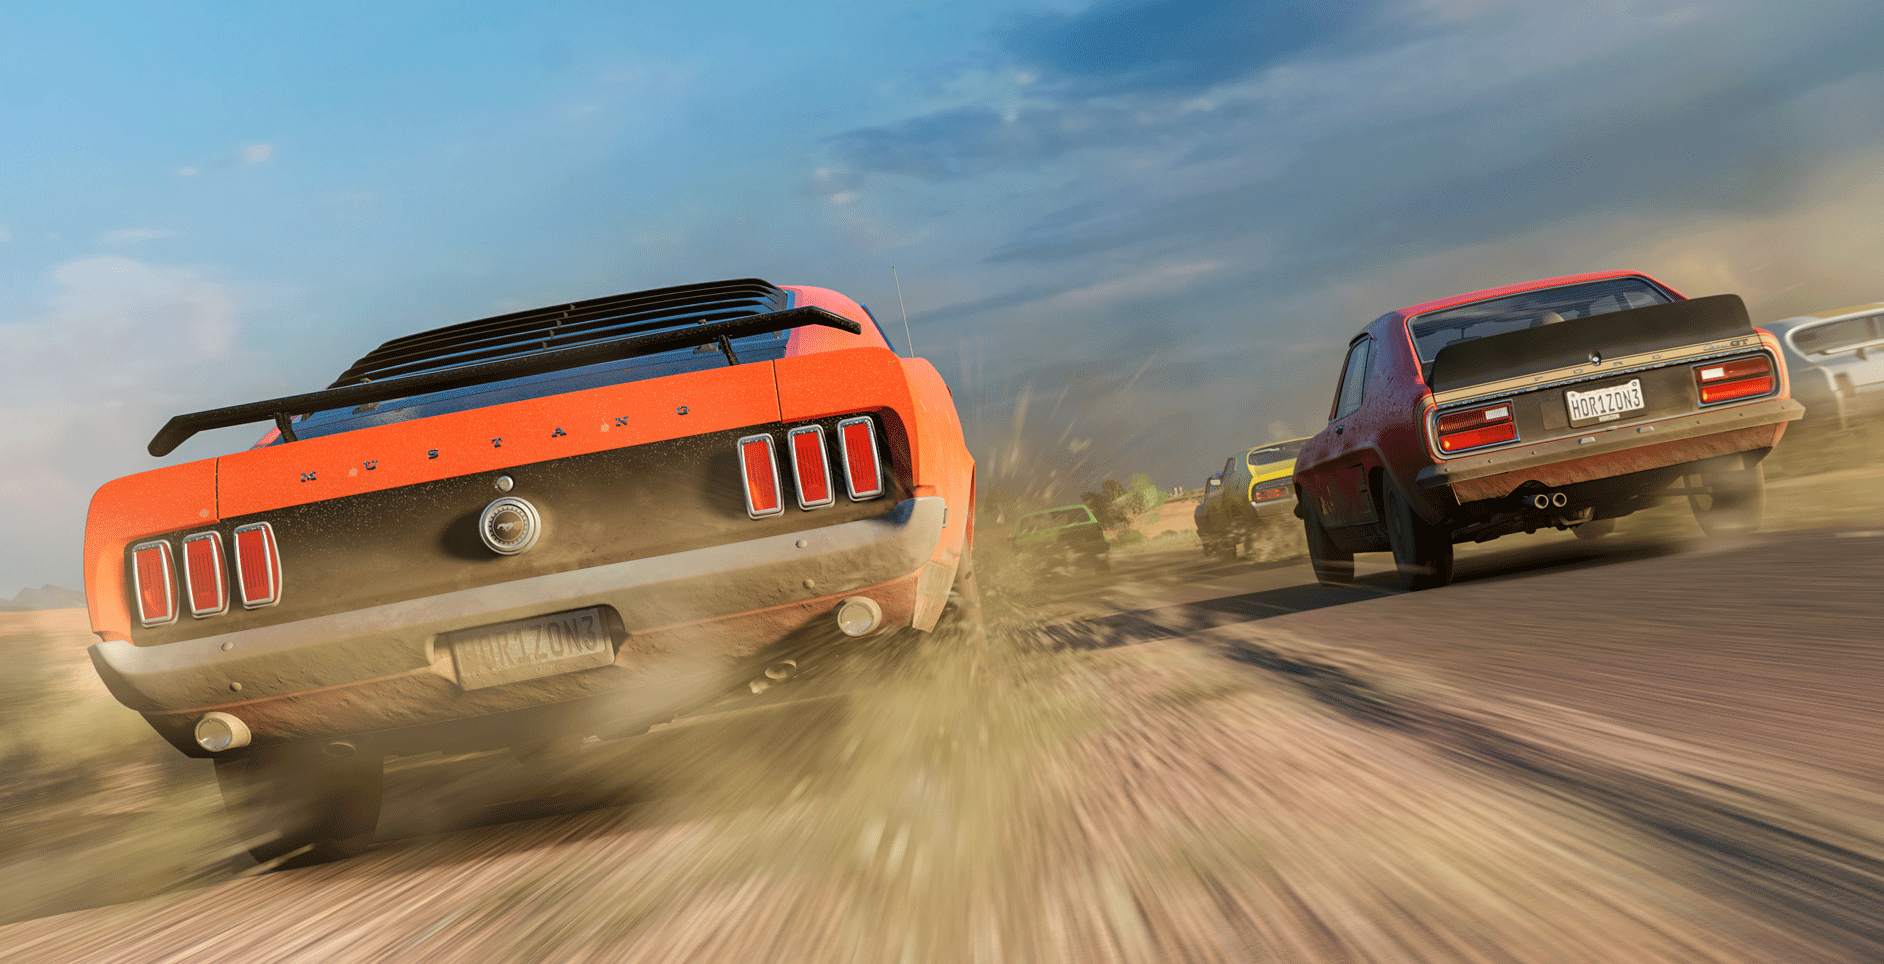 Forza Horizon 3 System Requirements (Updated 2022)